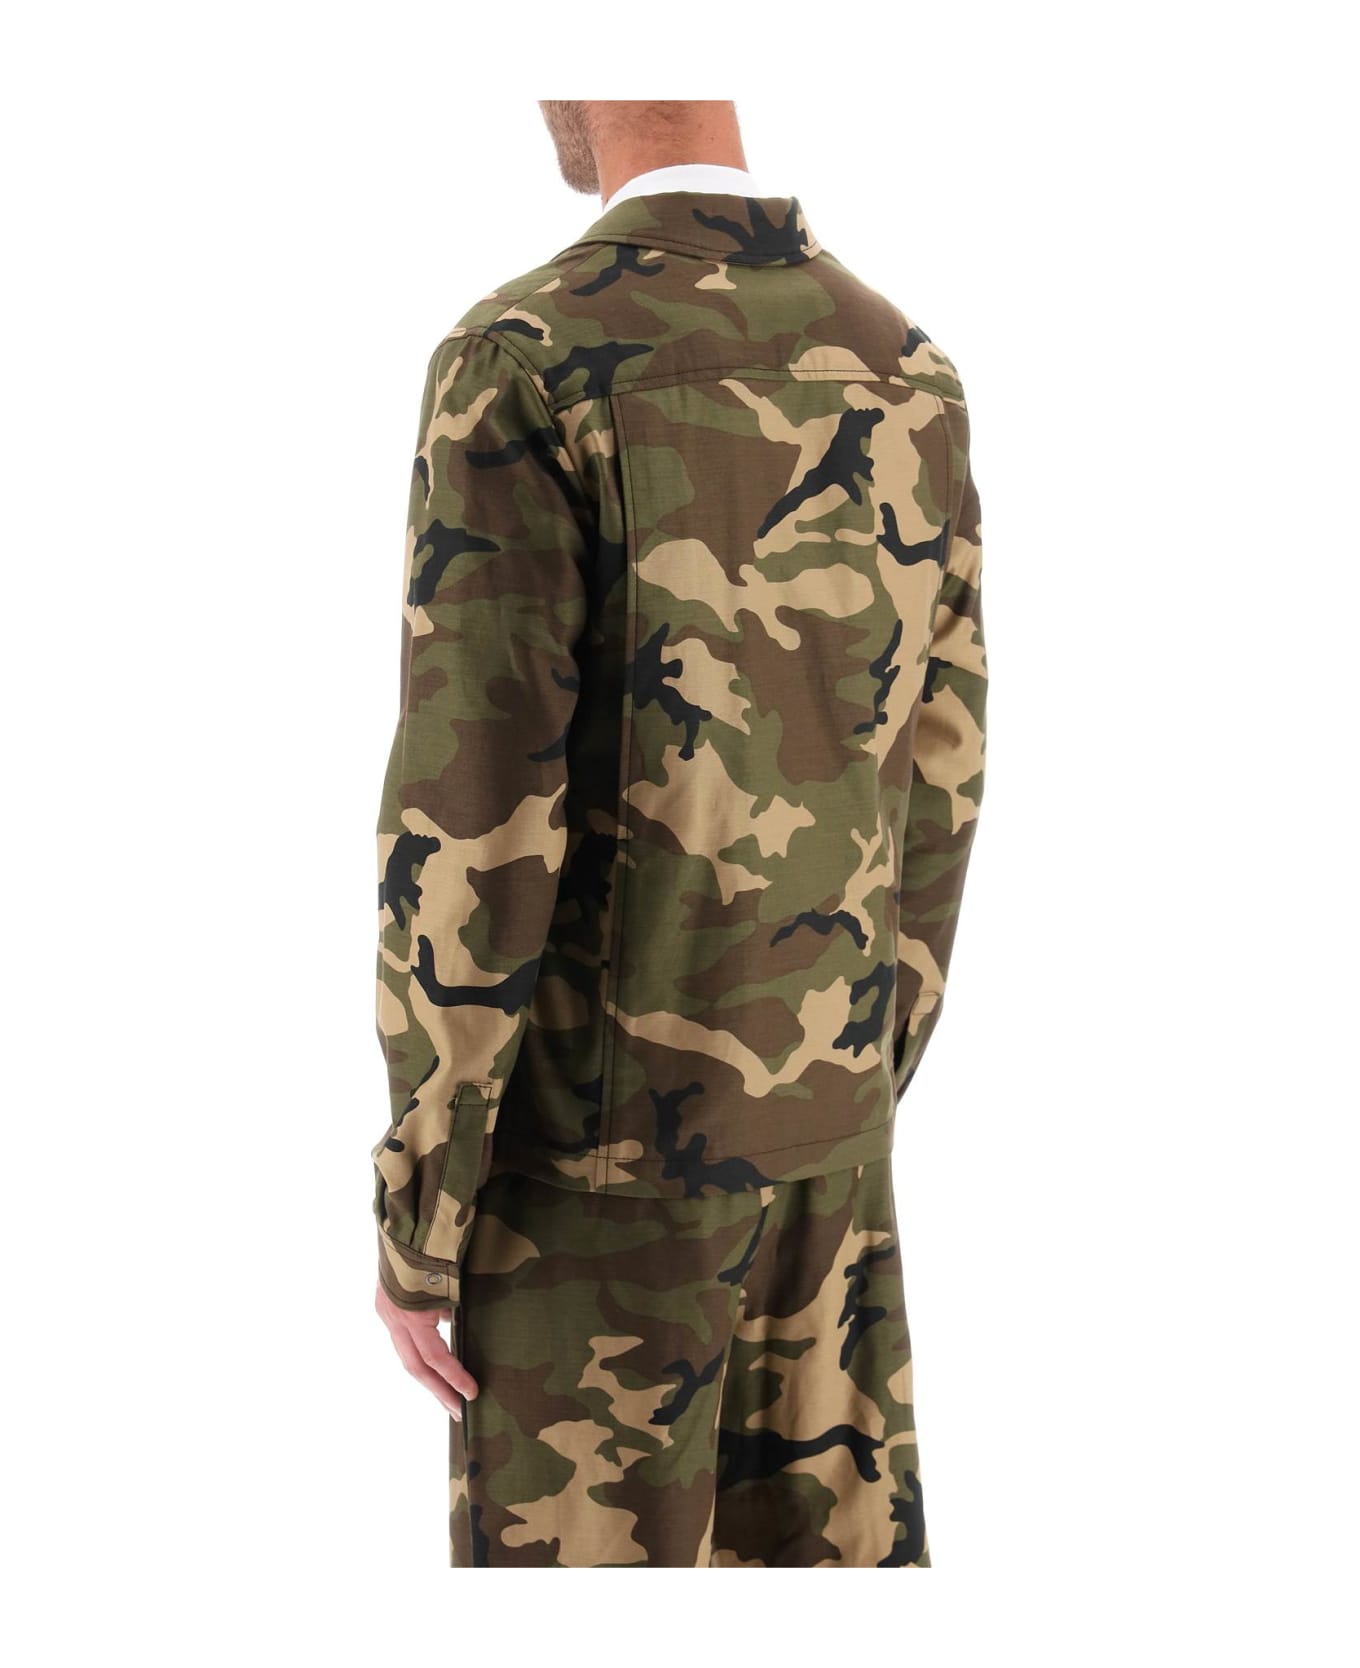 Palm Angels Camouflage Jacket With Pockets - MILITARY OFF WHITE (Beige)